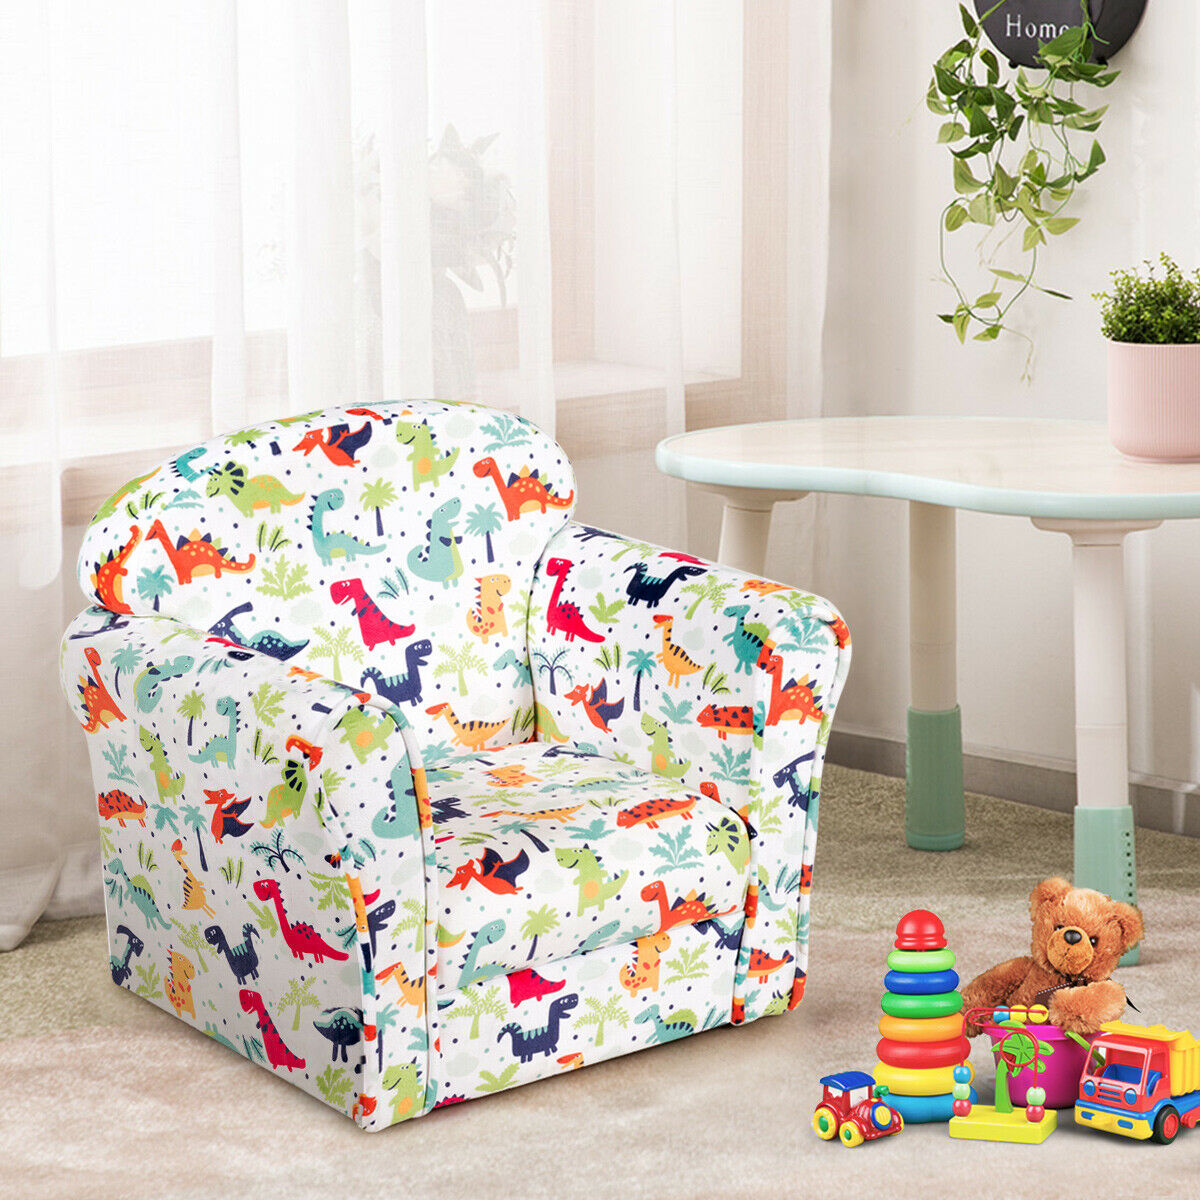 childrens couch kmart